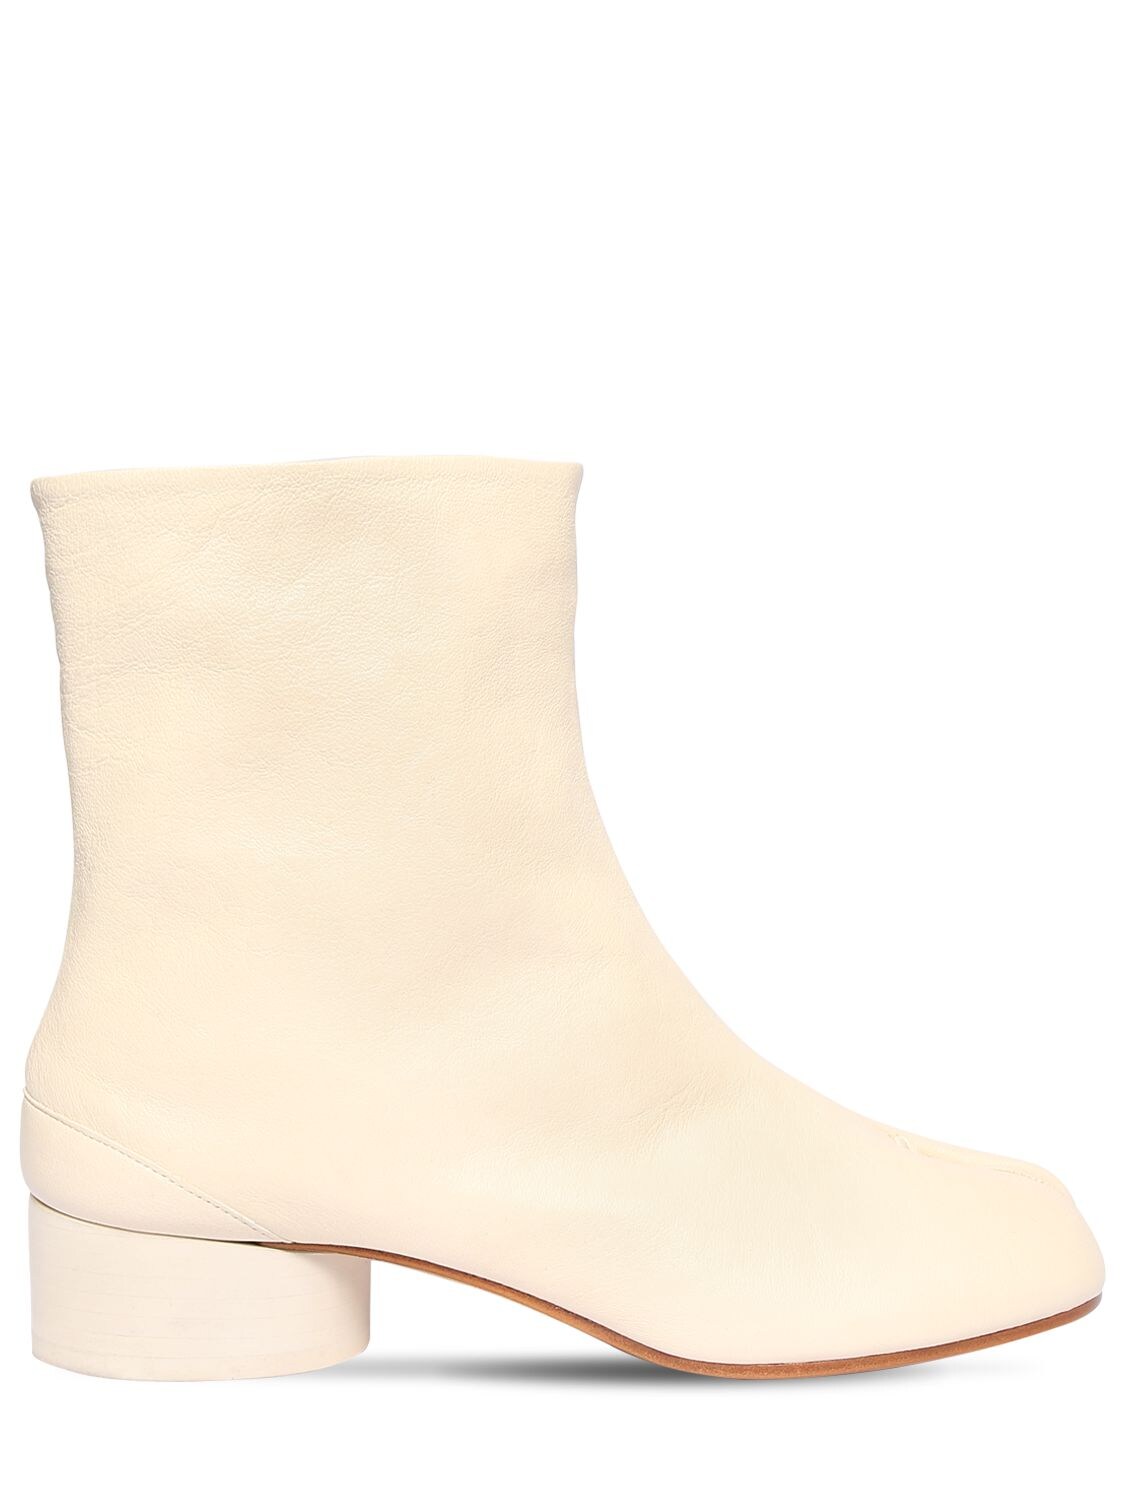 Maison Margiela 30mm Tabi Vintage Leather Ankle Boots In Ivory